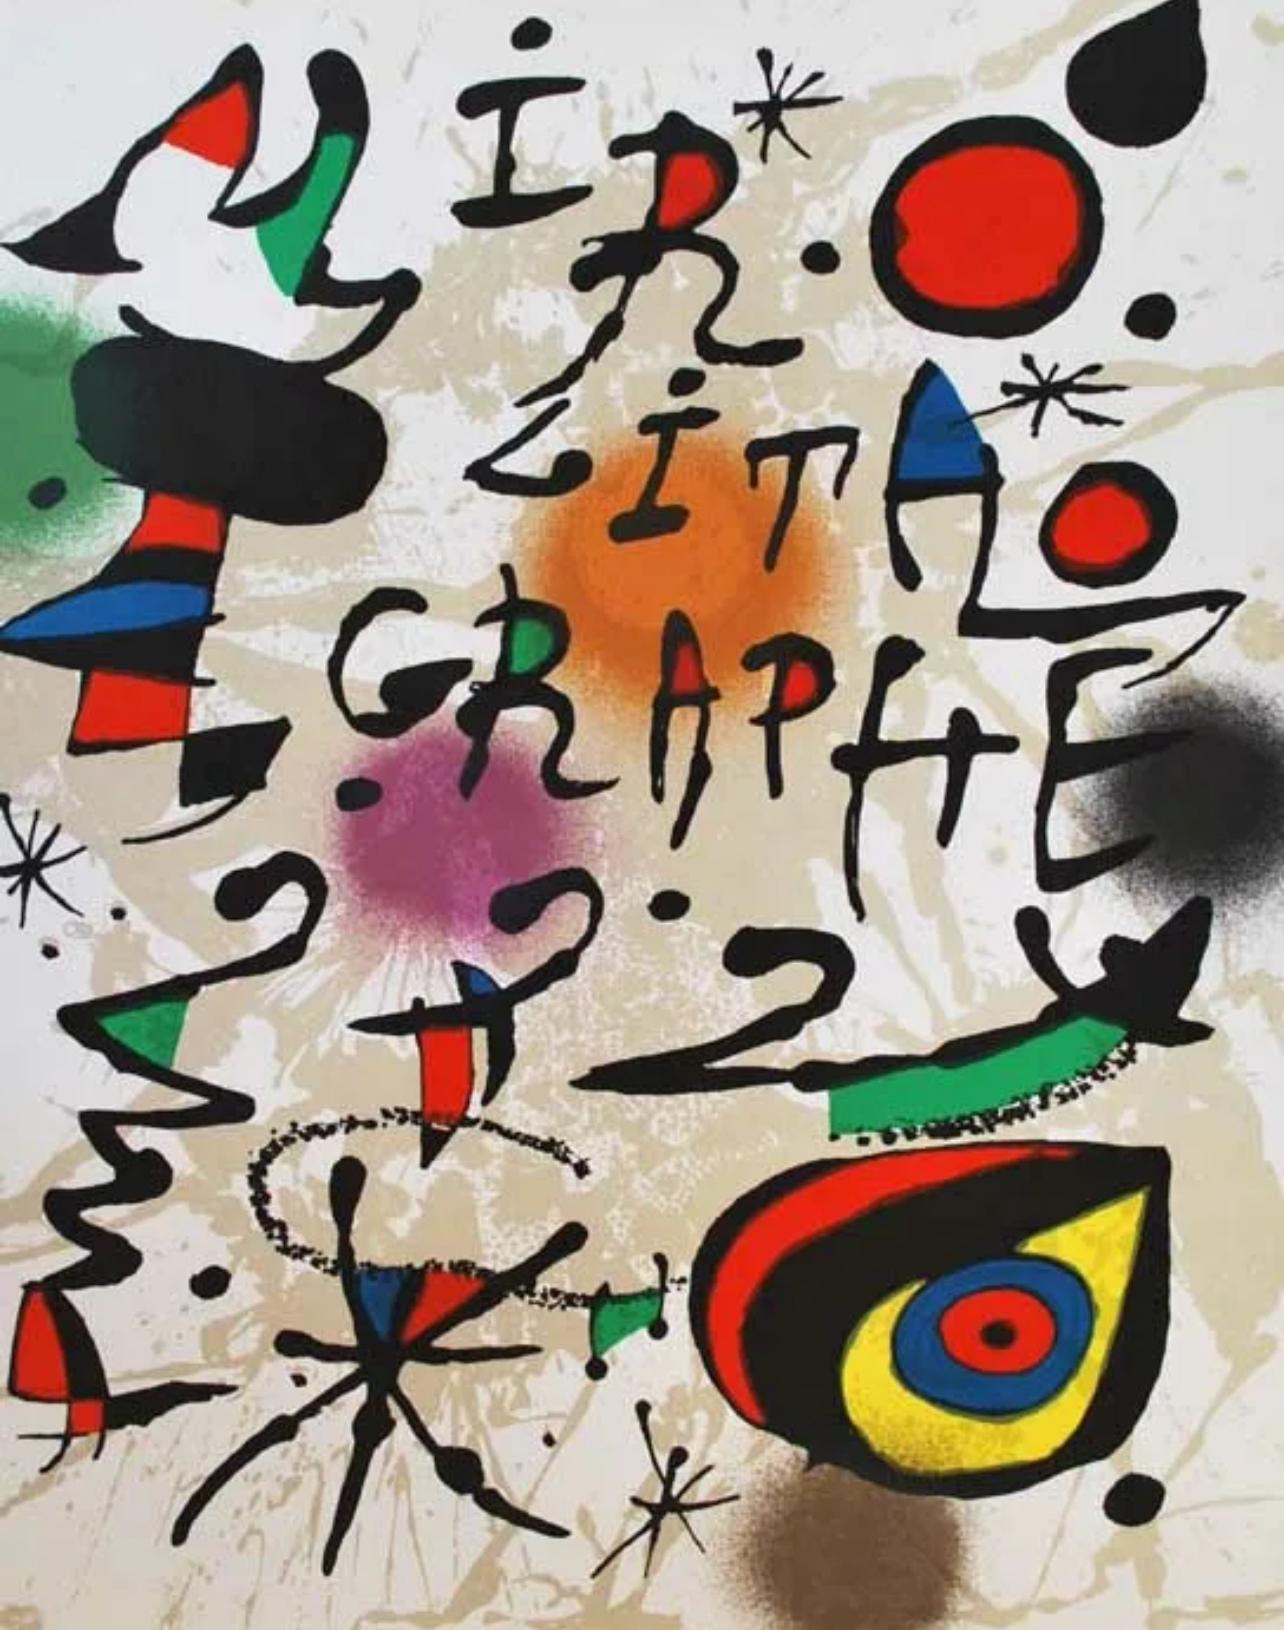 Joan Miró Abstract Print - Miro, Composition, 1977 (after)